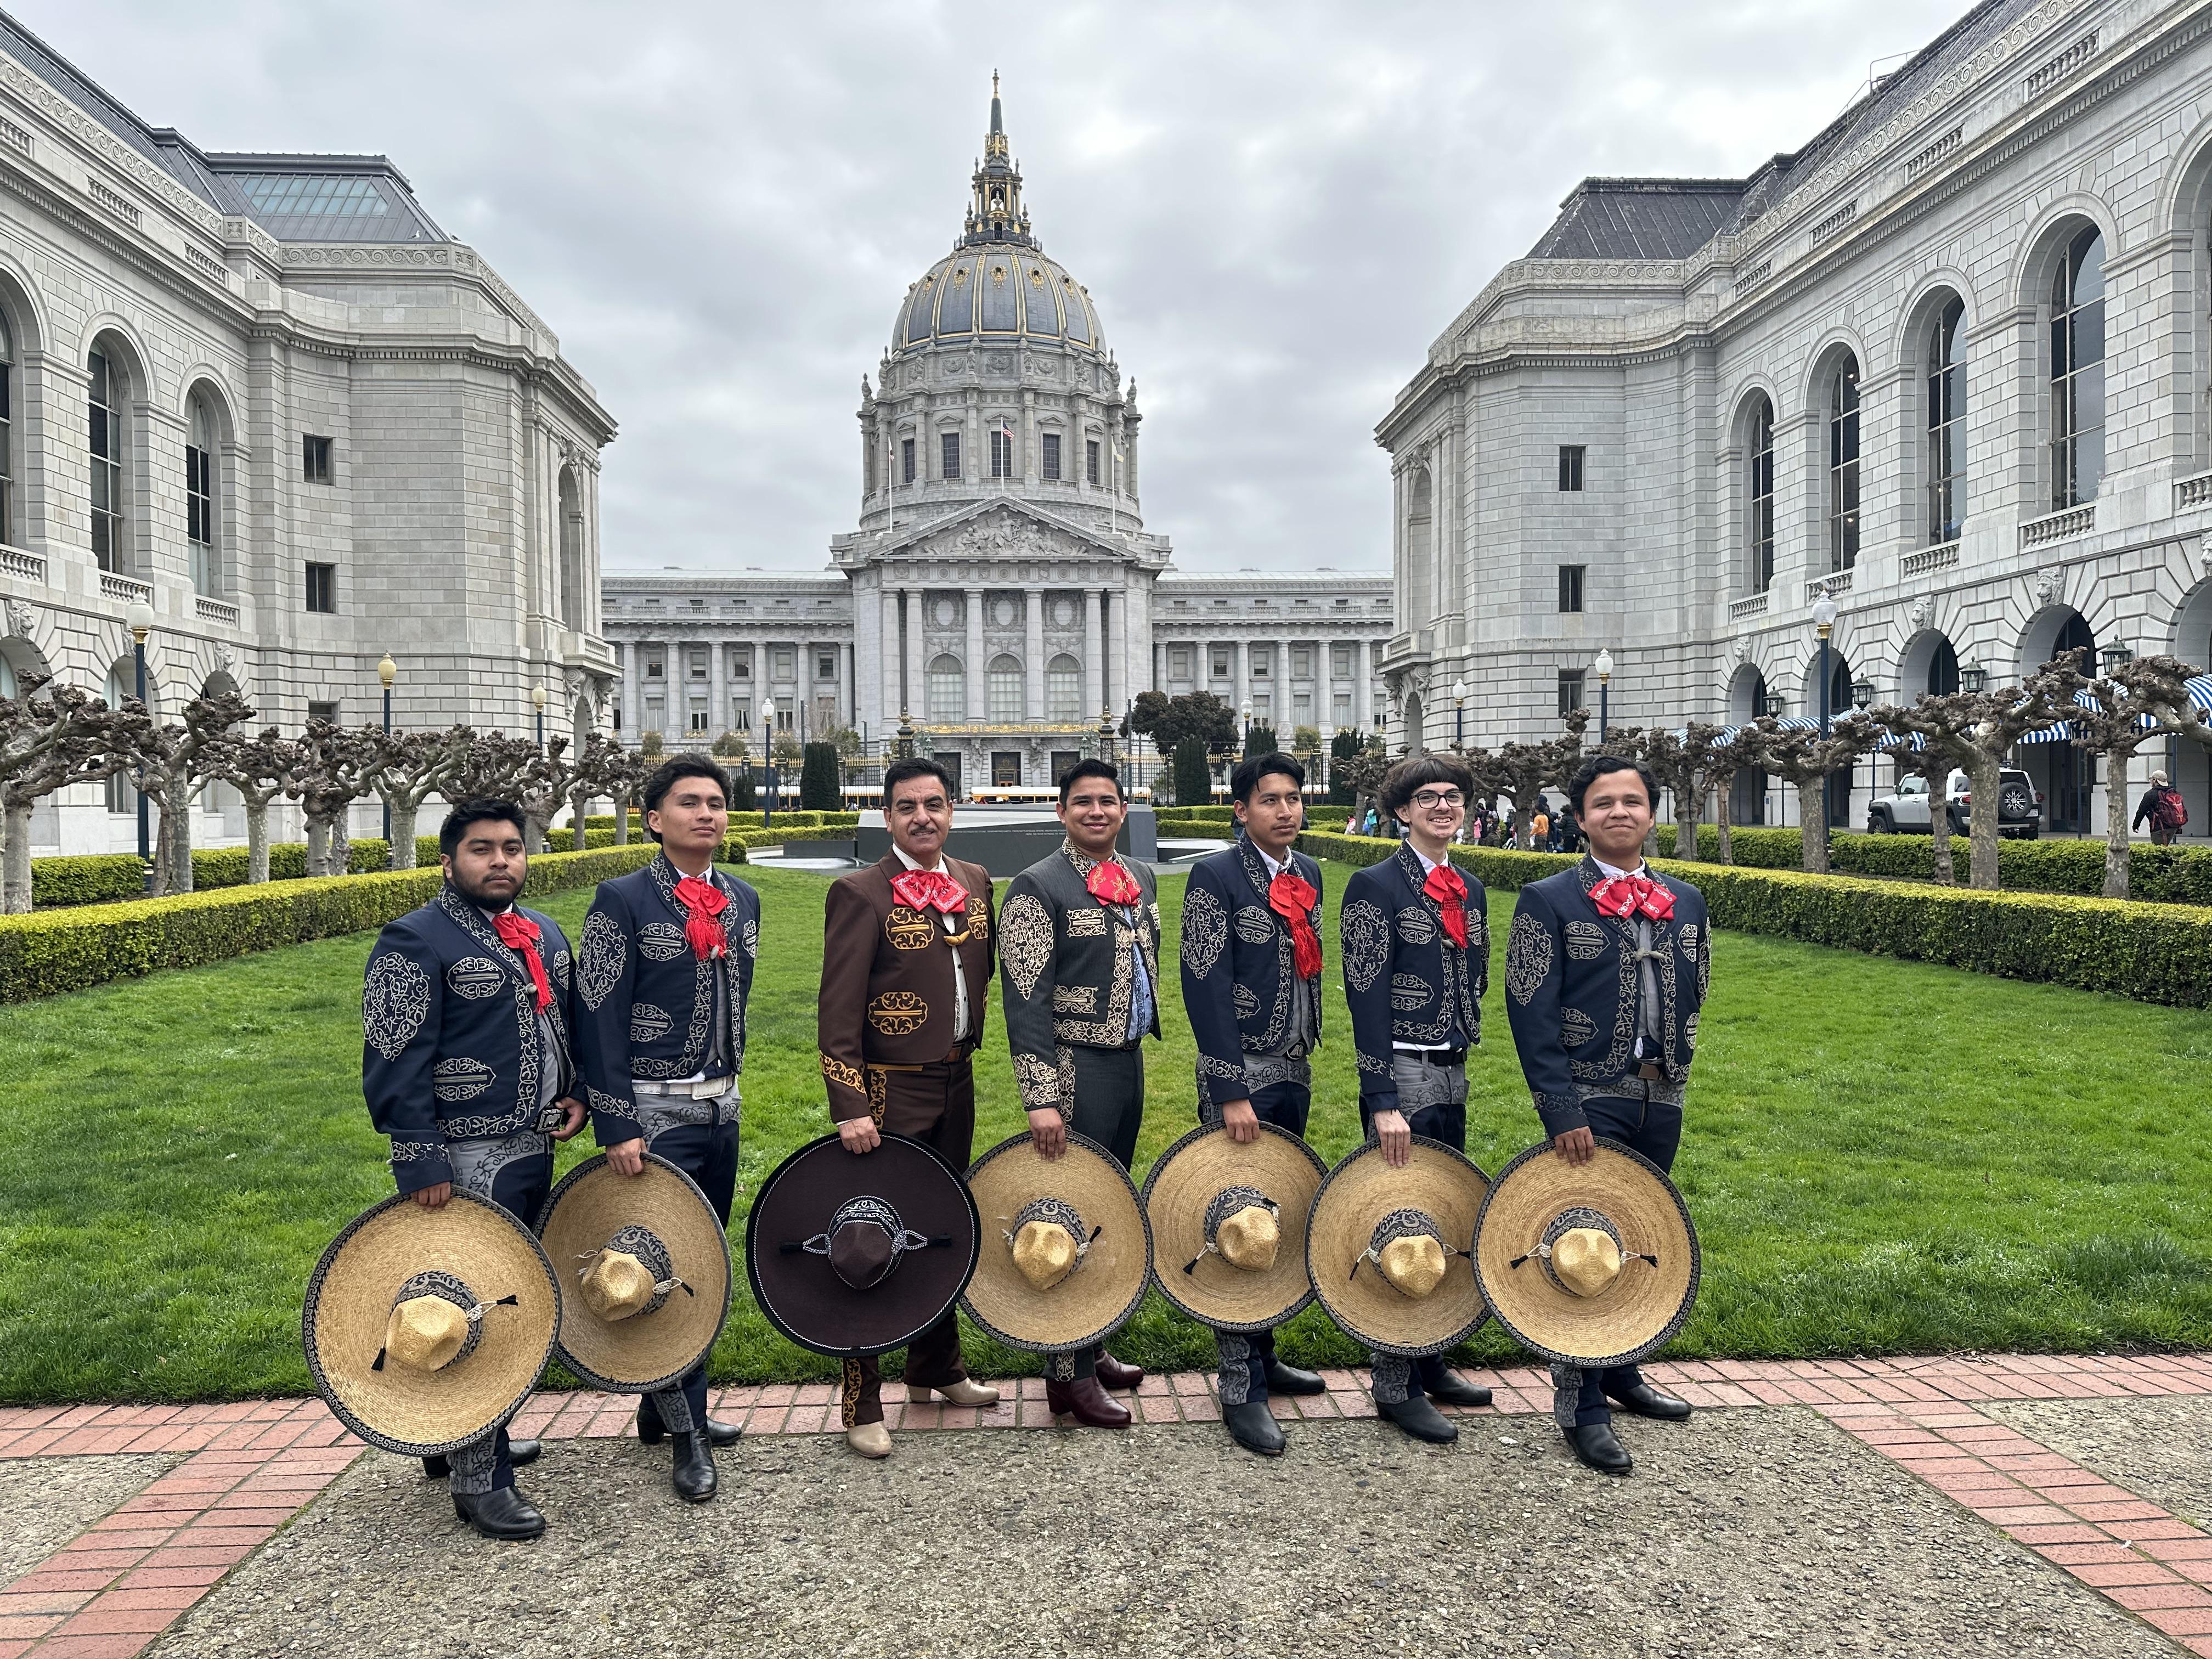 Students of South San Francisco High School's Ballet Folklórico Alma de México program pose in front of San Francisco City Hall on March 20, 2023, before performing at the War Memorial Opera House as part of San Francisco Unified School District's annual Children's Day celebration.